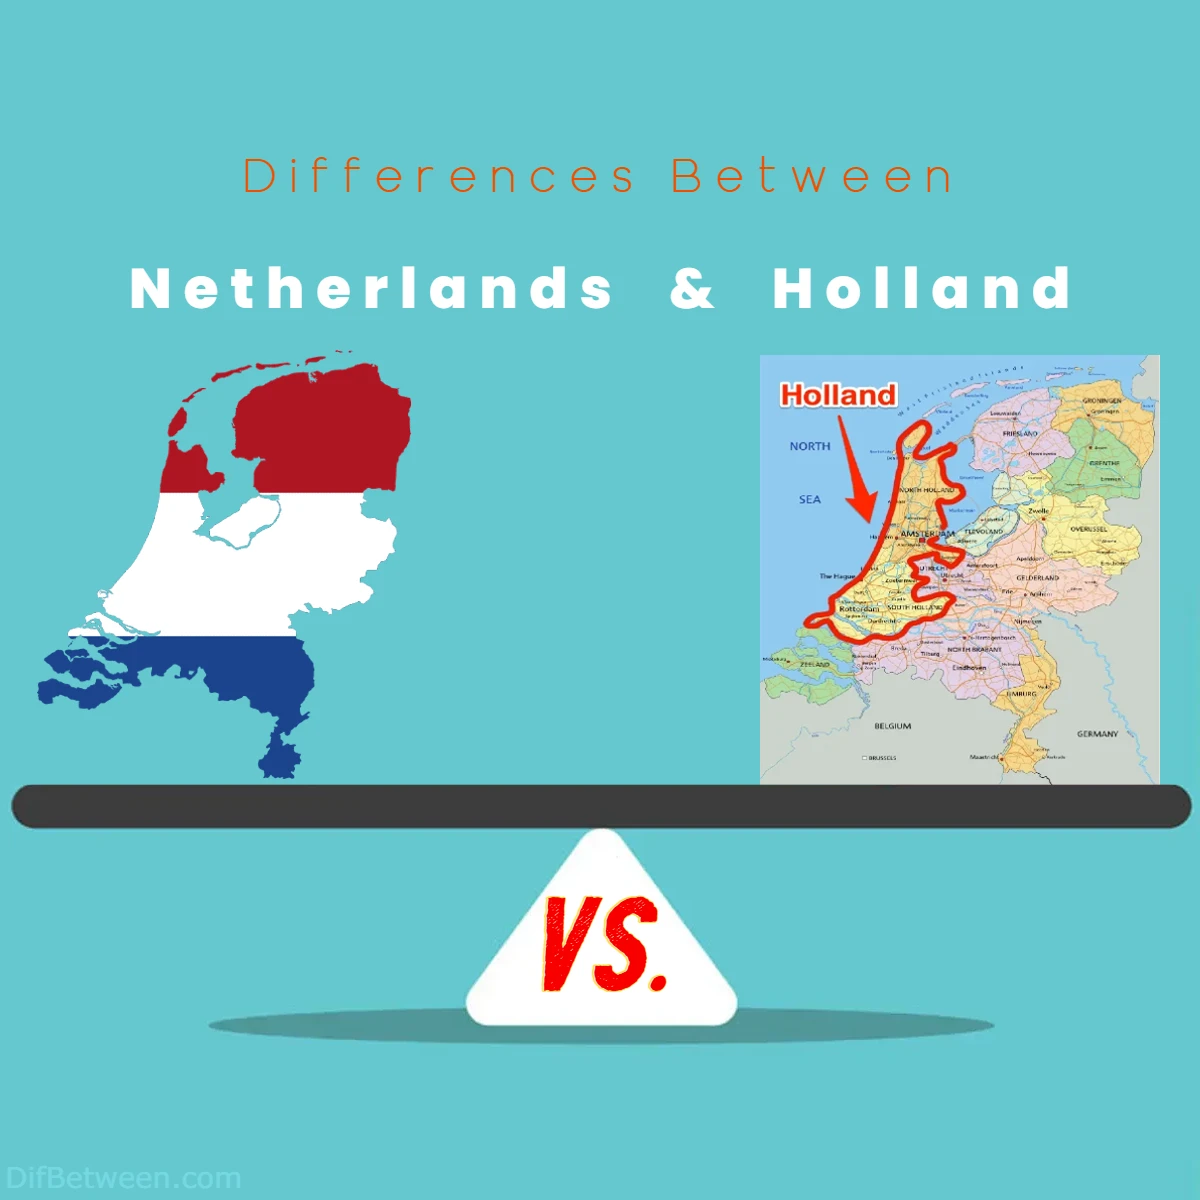 Differences Between Netherlands vs Holland